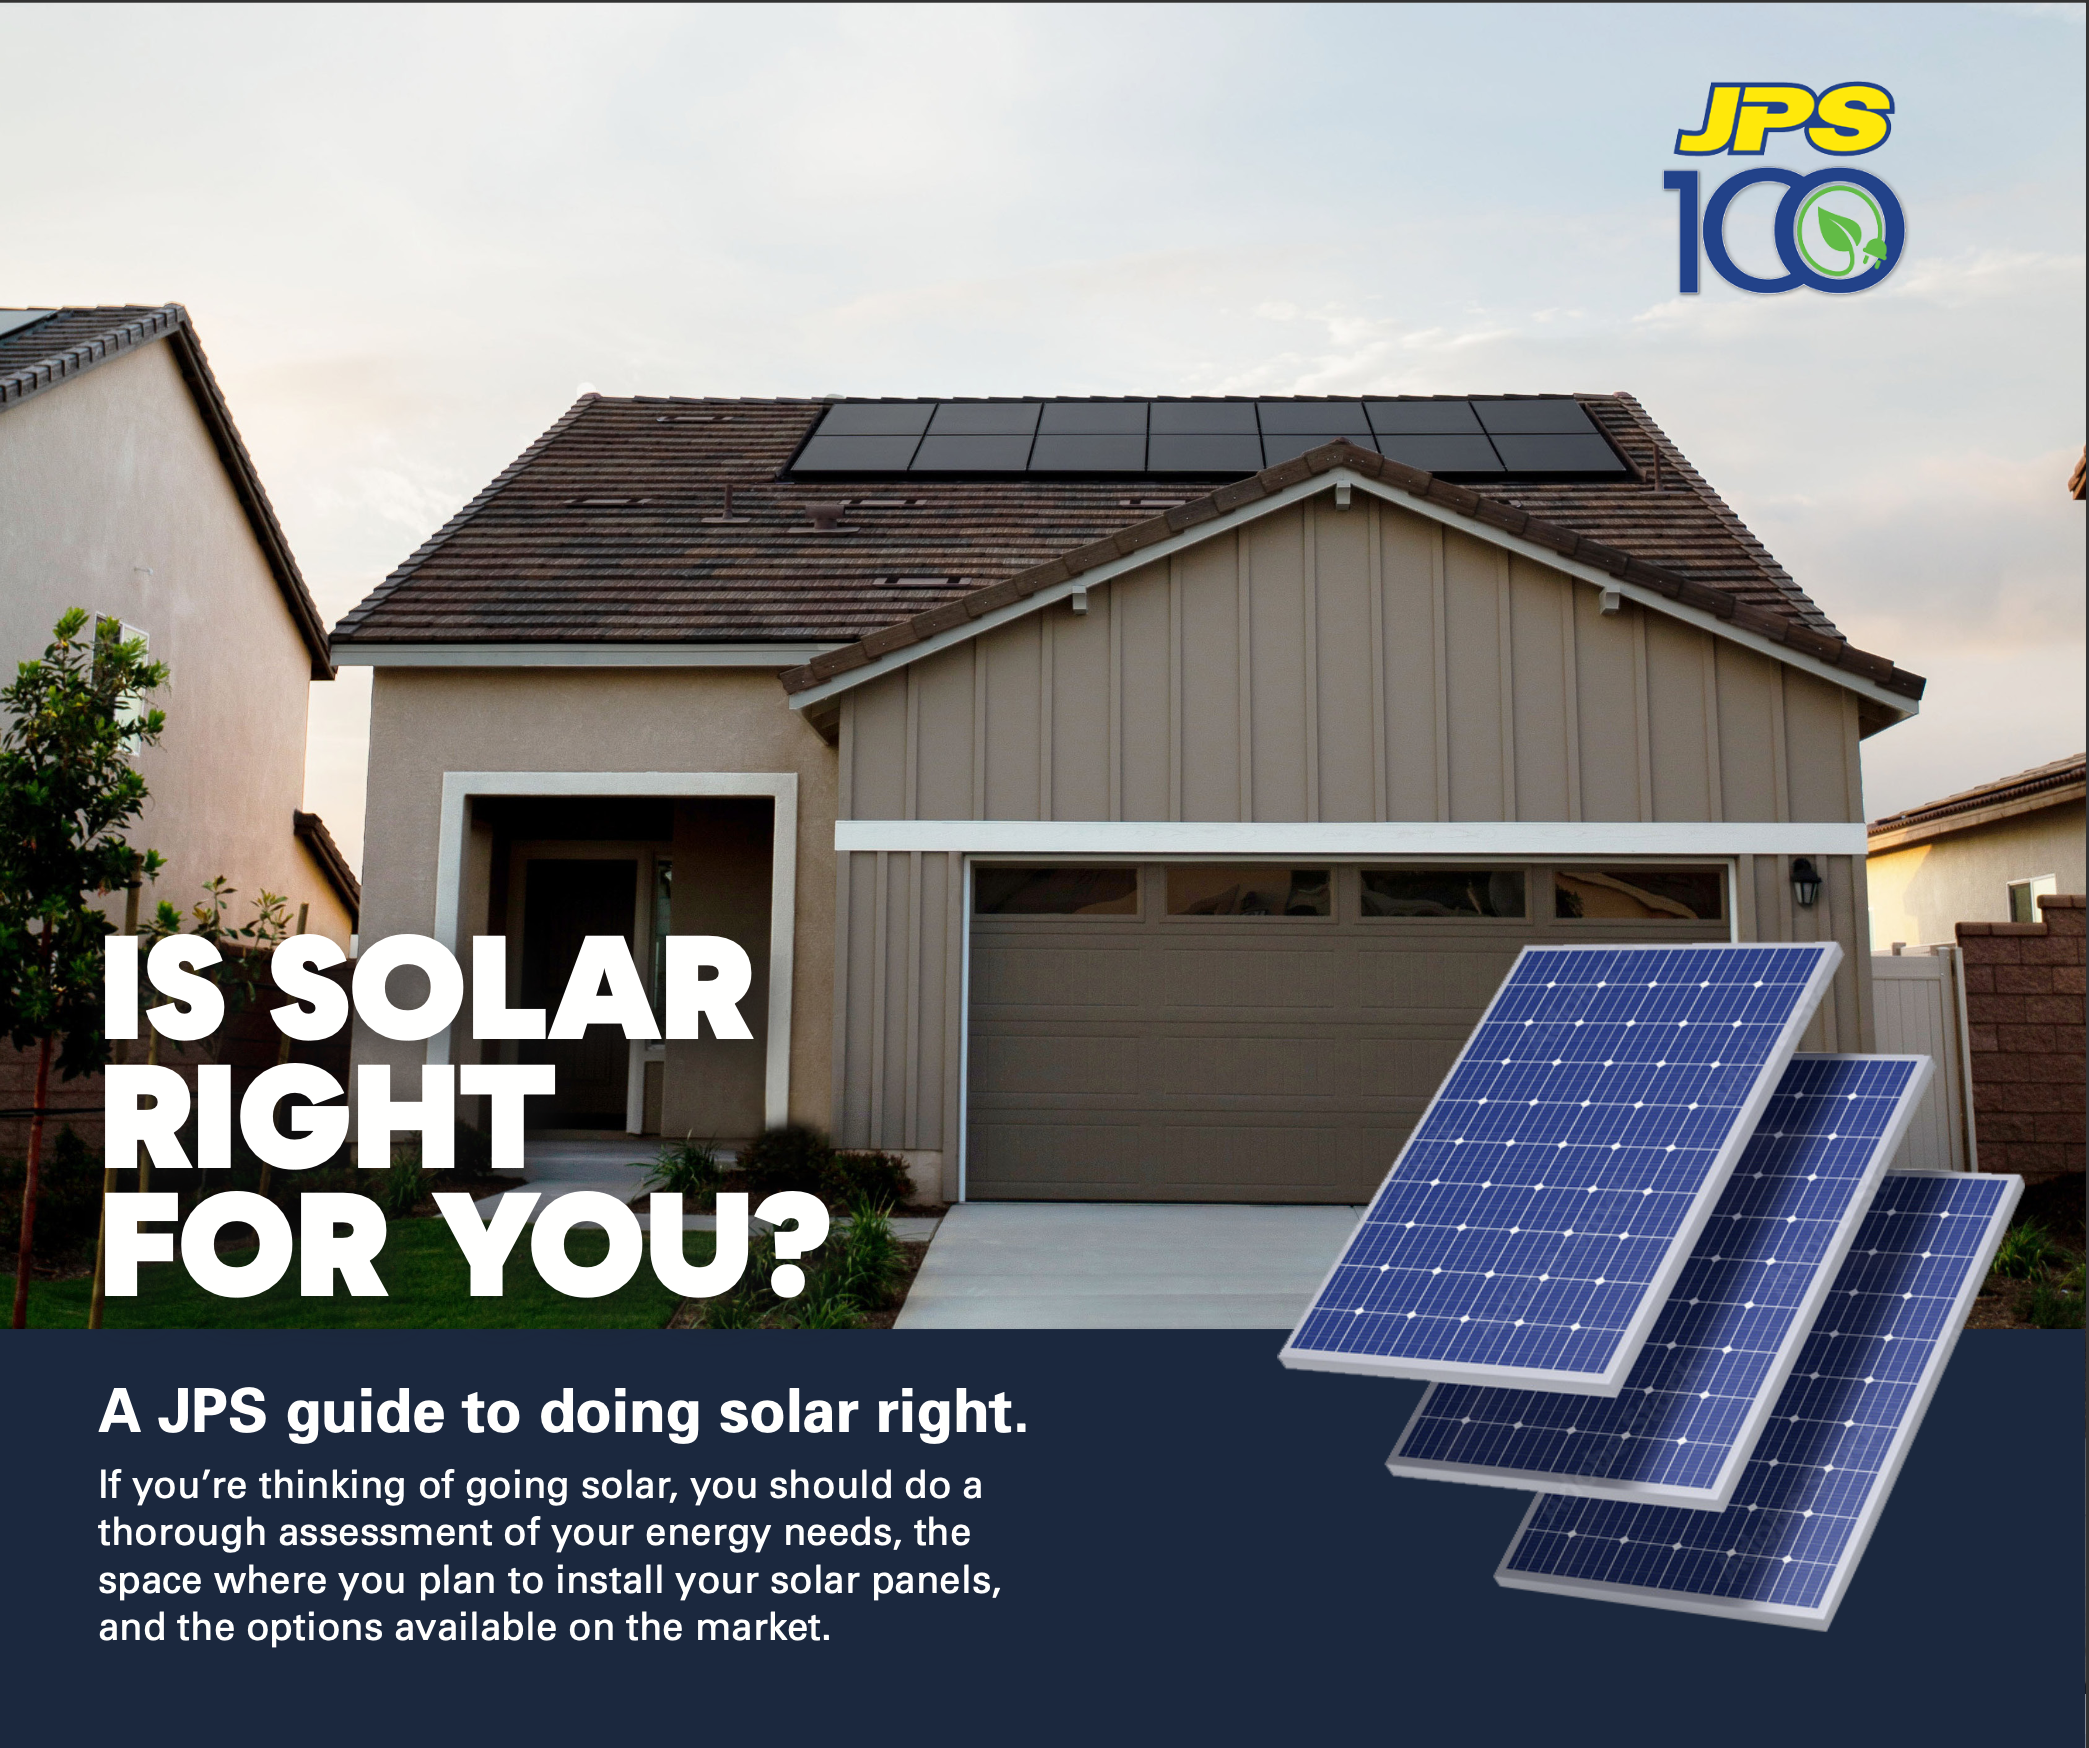 A JPS guide to doing solar right. If you’re thinking of going solar, you should do a thorough assessment of your energy needs, the space where you plan to install your solar panels, and the options available on the market.